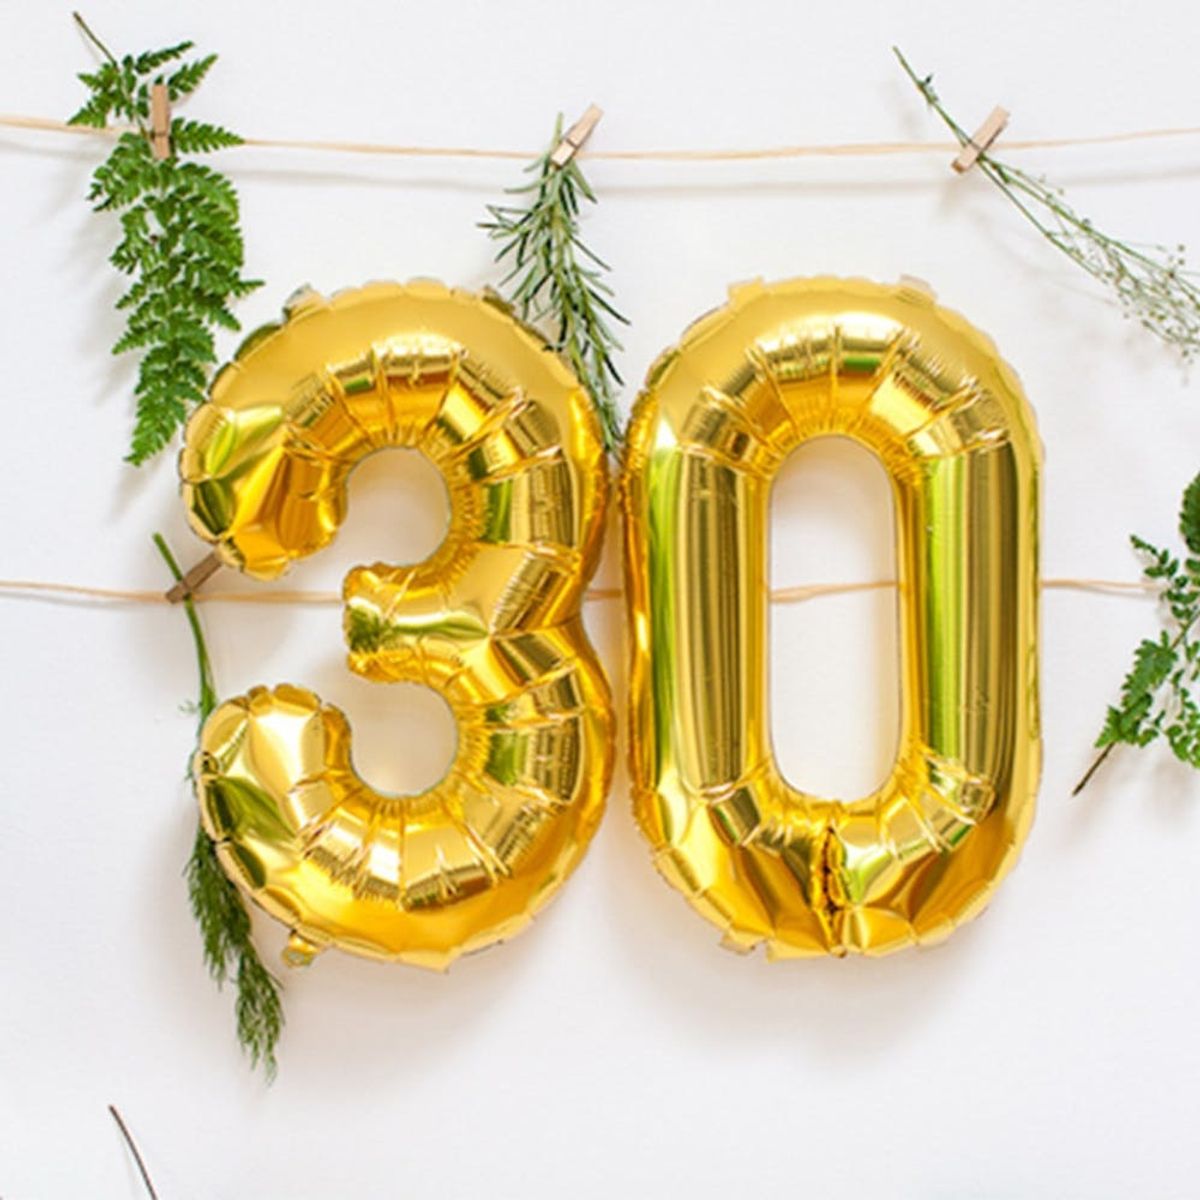 Yo, Shorty — It’s Our Birthday! Let’s Celebrate With 30% Off ALL Classes (SALE ENDED)